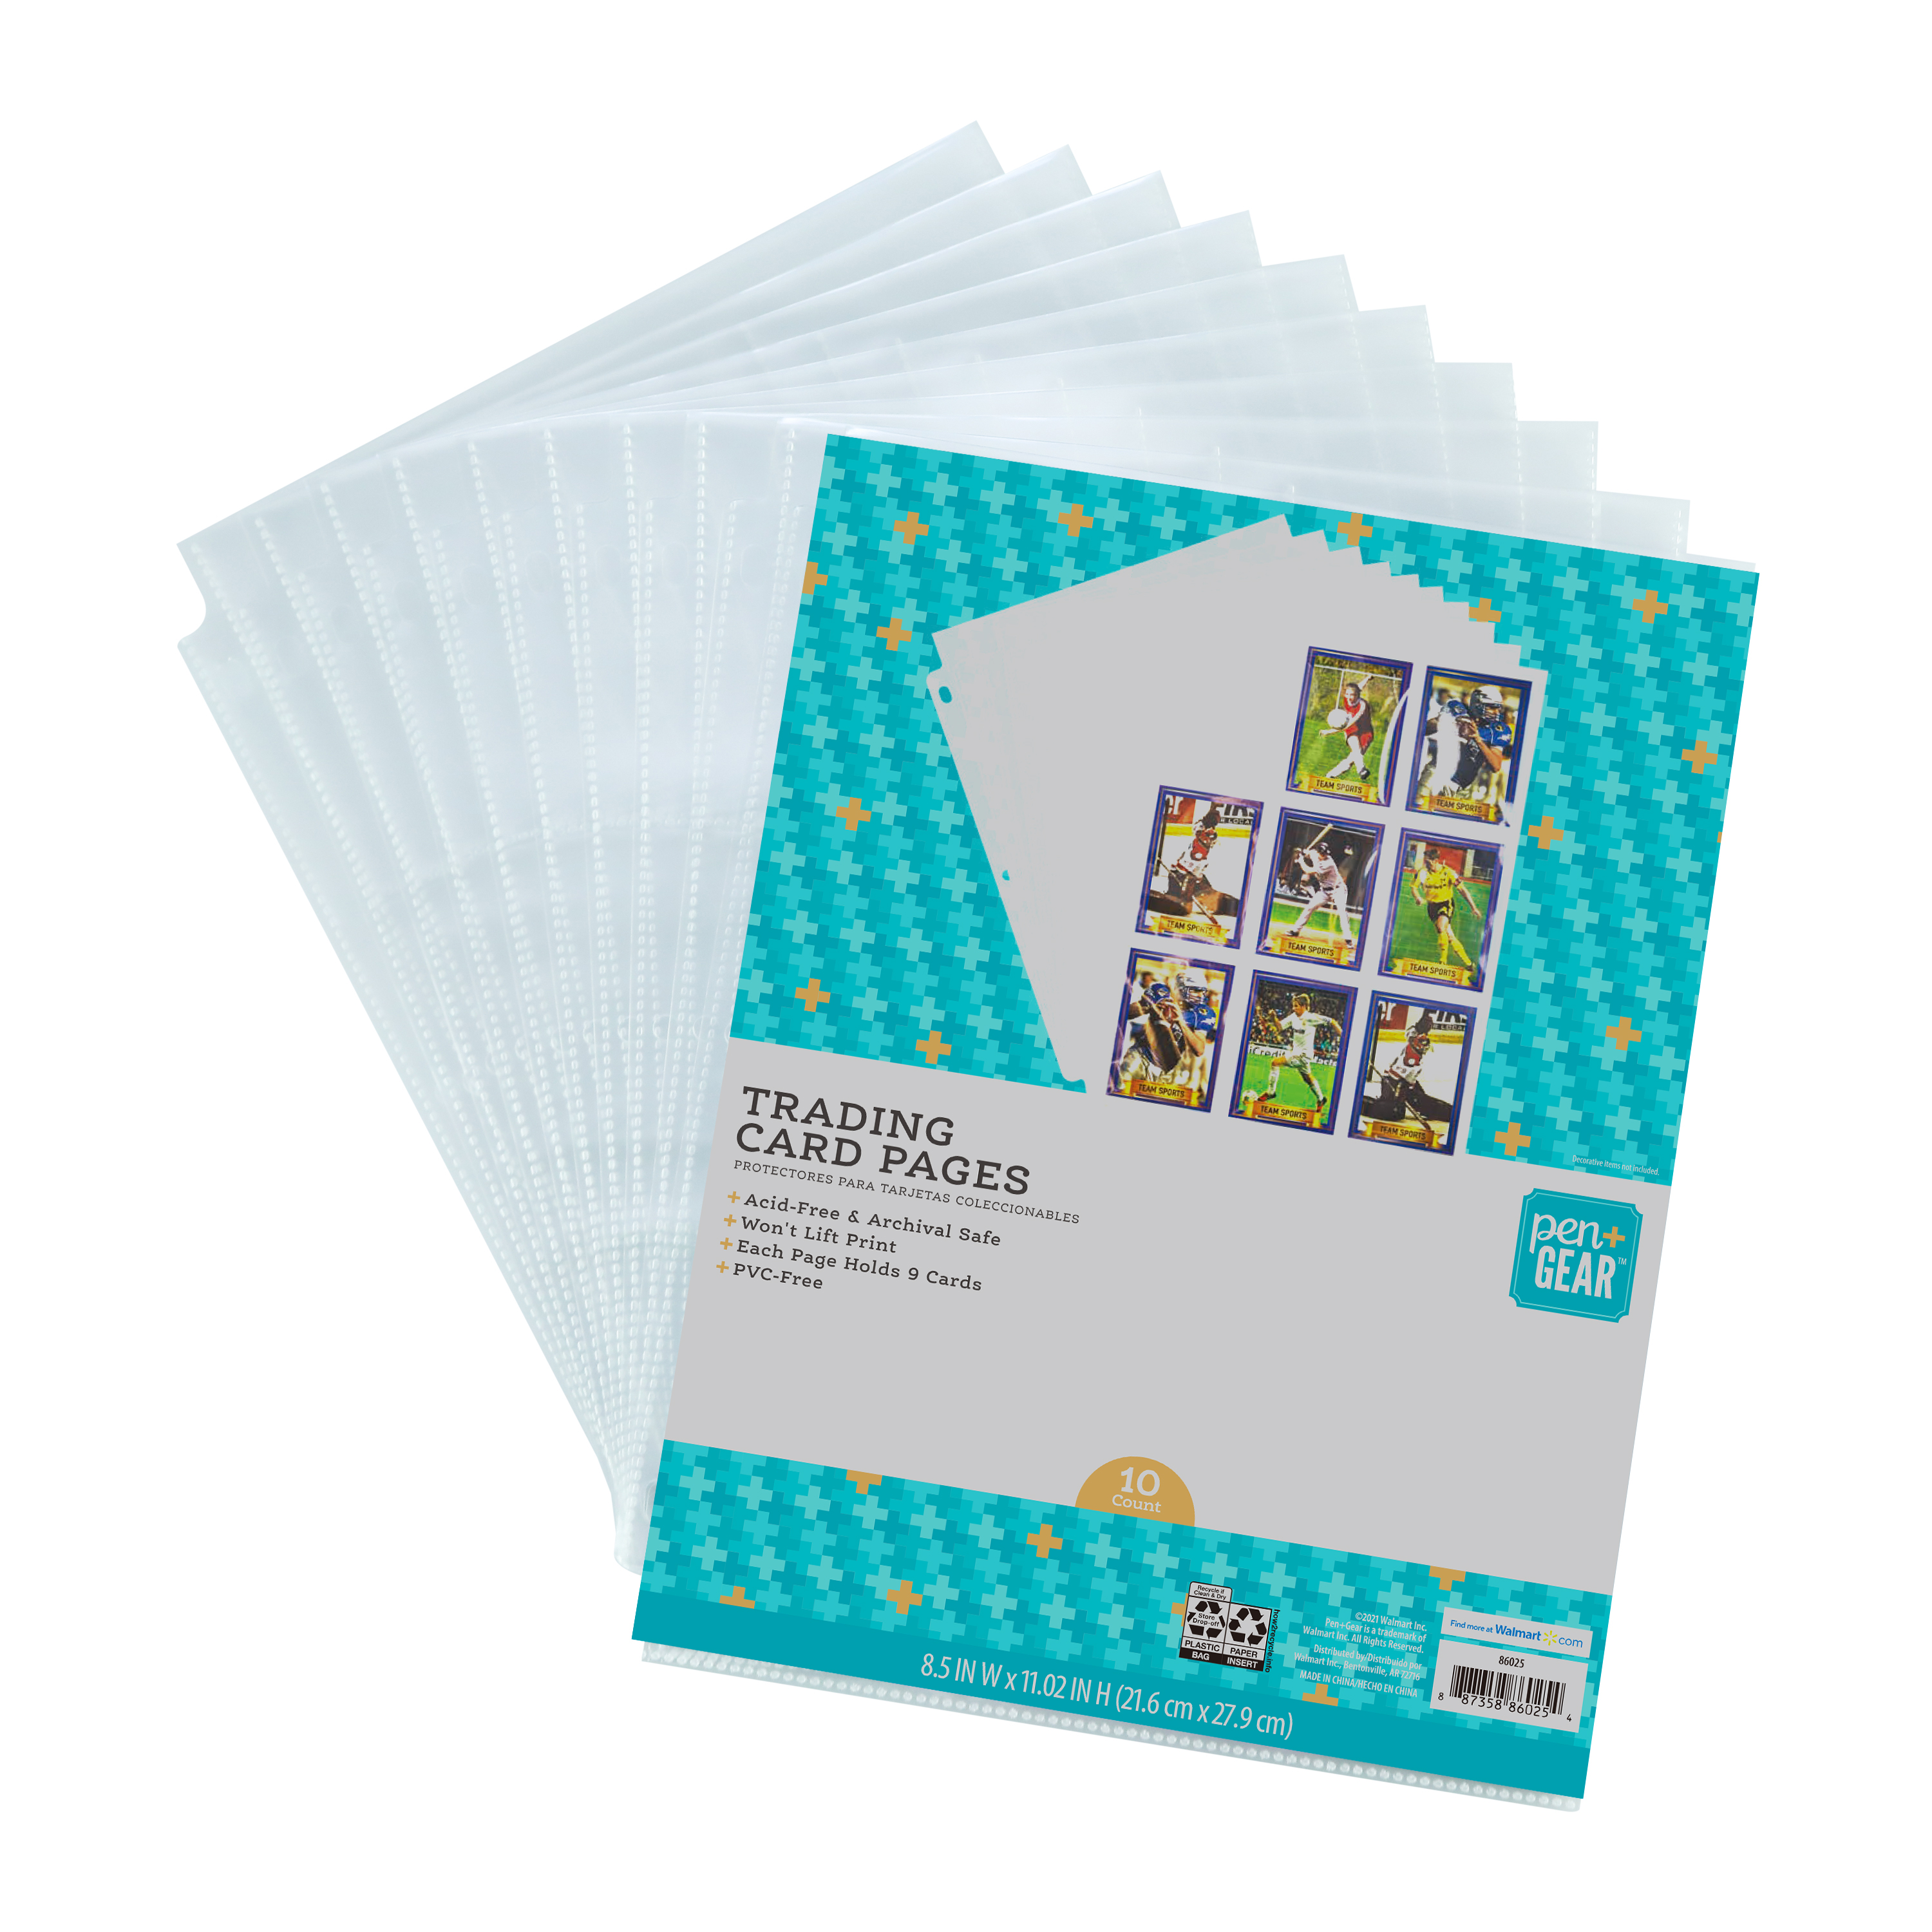 Pen + Gear 9-Pocket Protective Trading Card Pages, Sheet Protectors, Clear, 10 Count - image 5 of 5